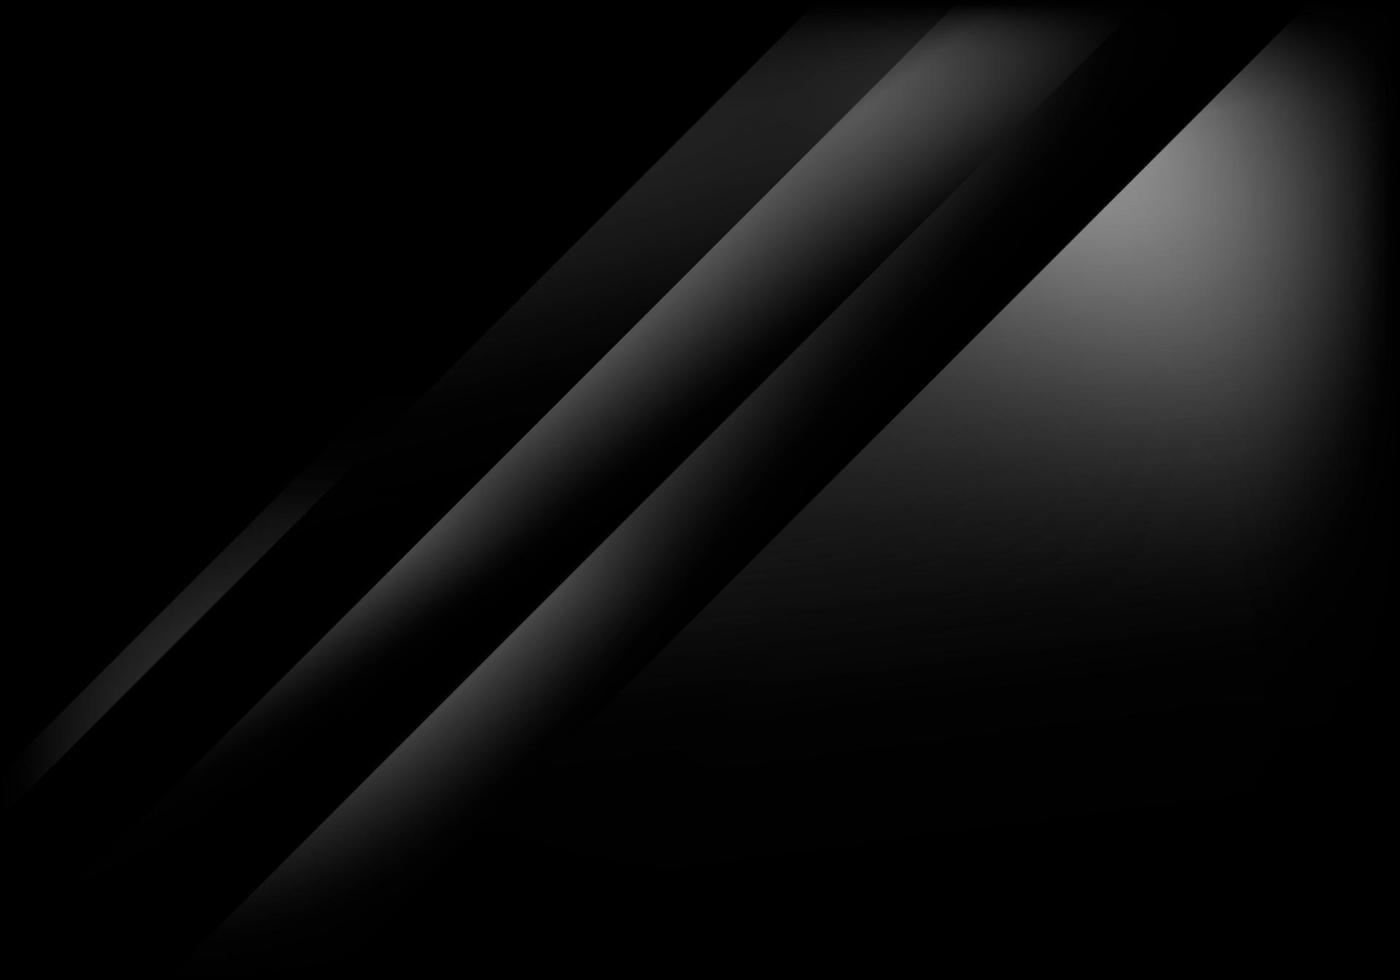 Abstract shiny black and gray diagonal stripes layered with light modern luxury design on dark background and texture vector